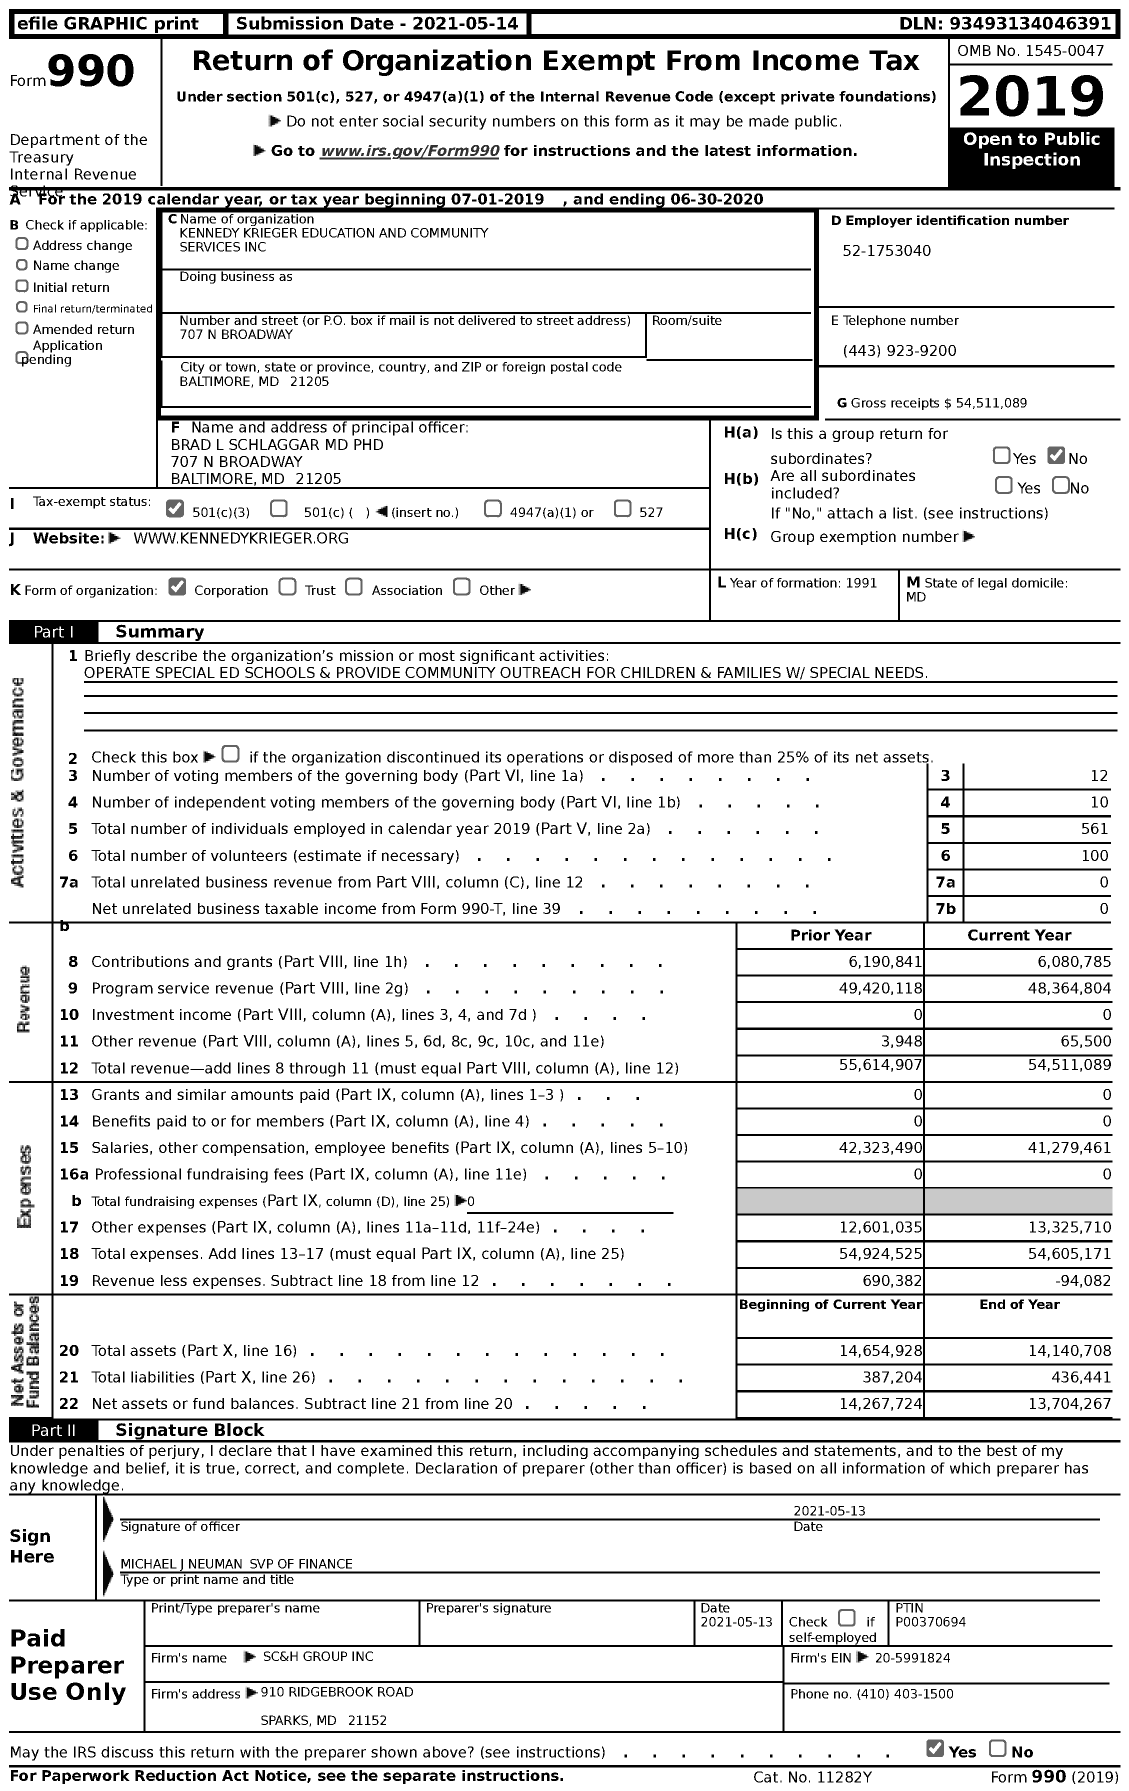 Image of first page of 2019 Form 990 for Kennedy Krieger Education and Community Services